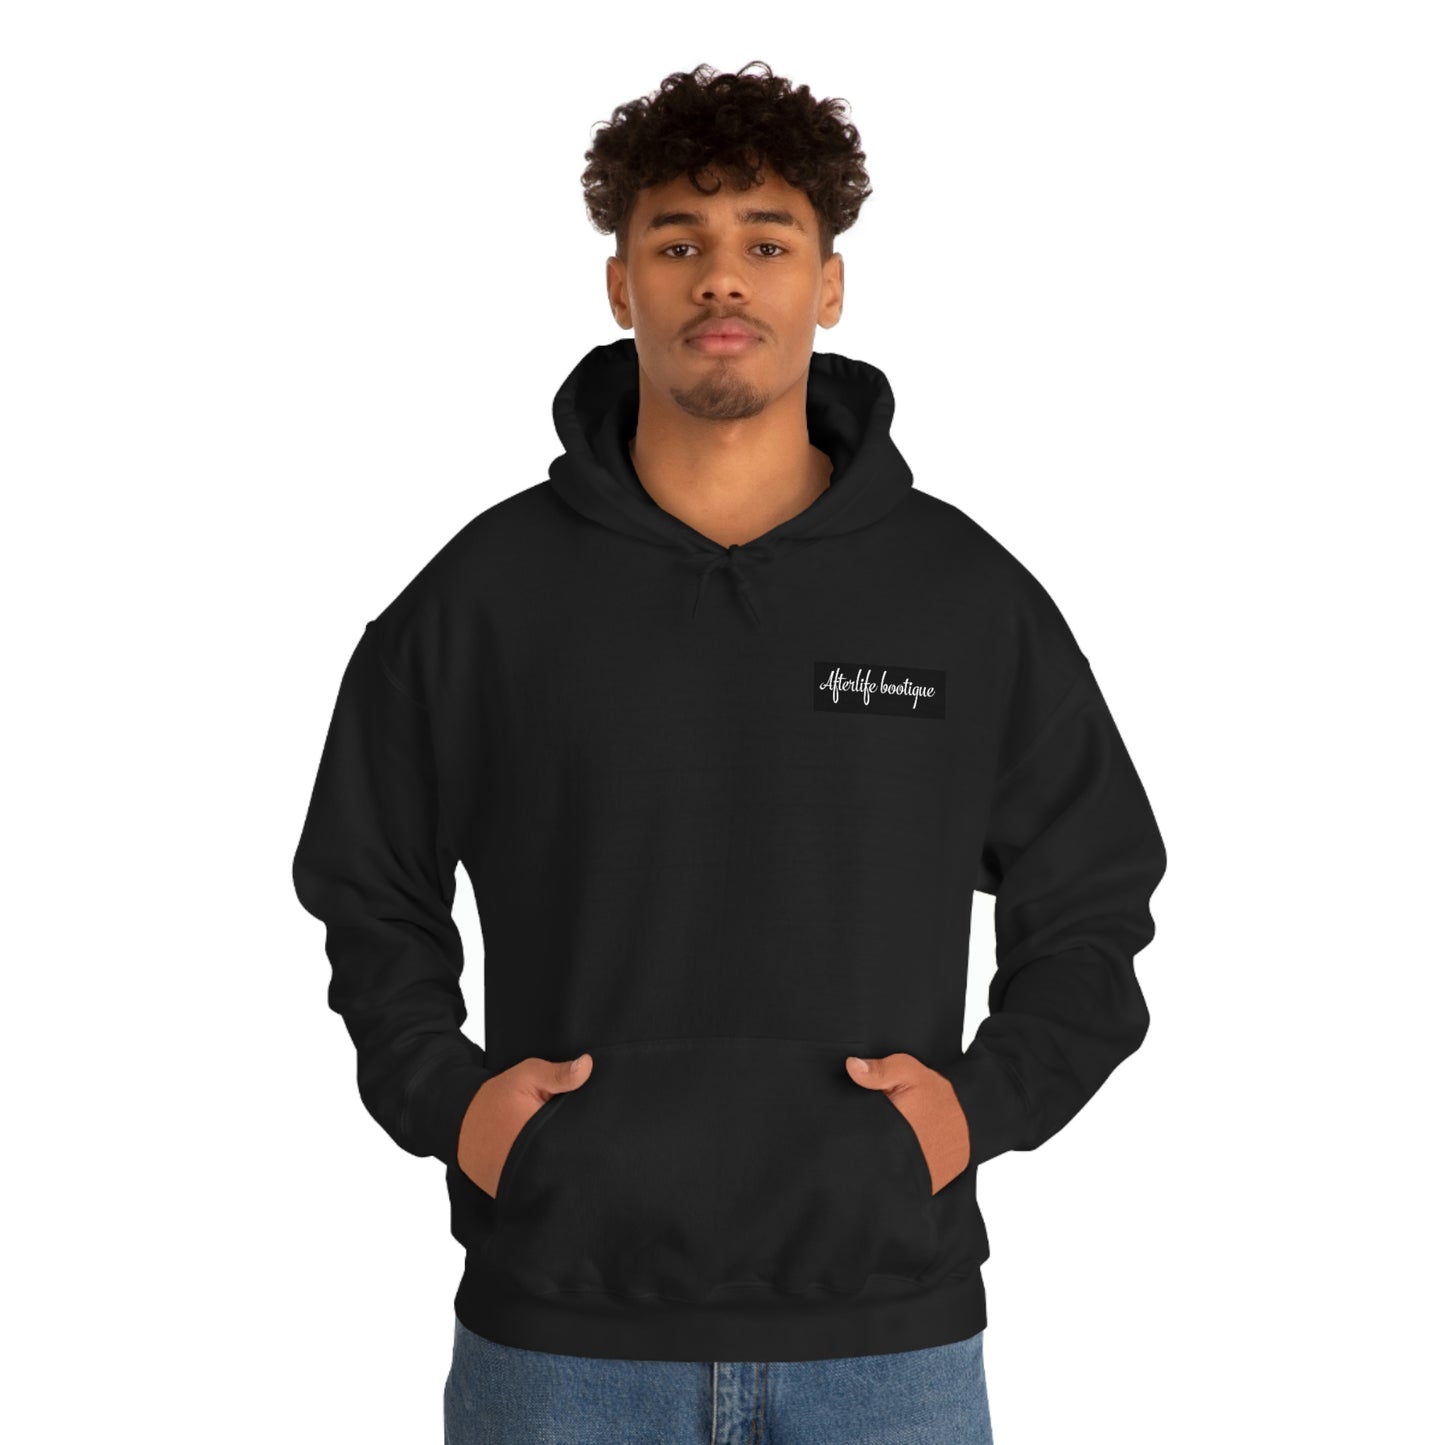 Afterlife Bootique Hoodies